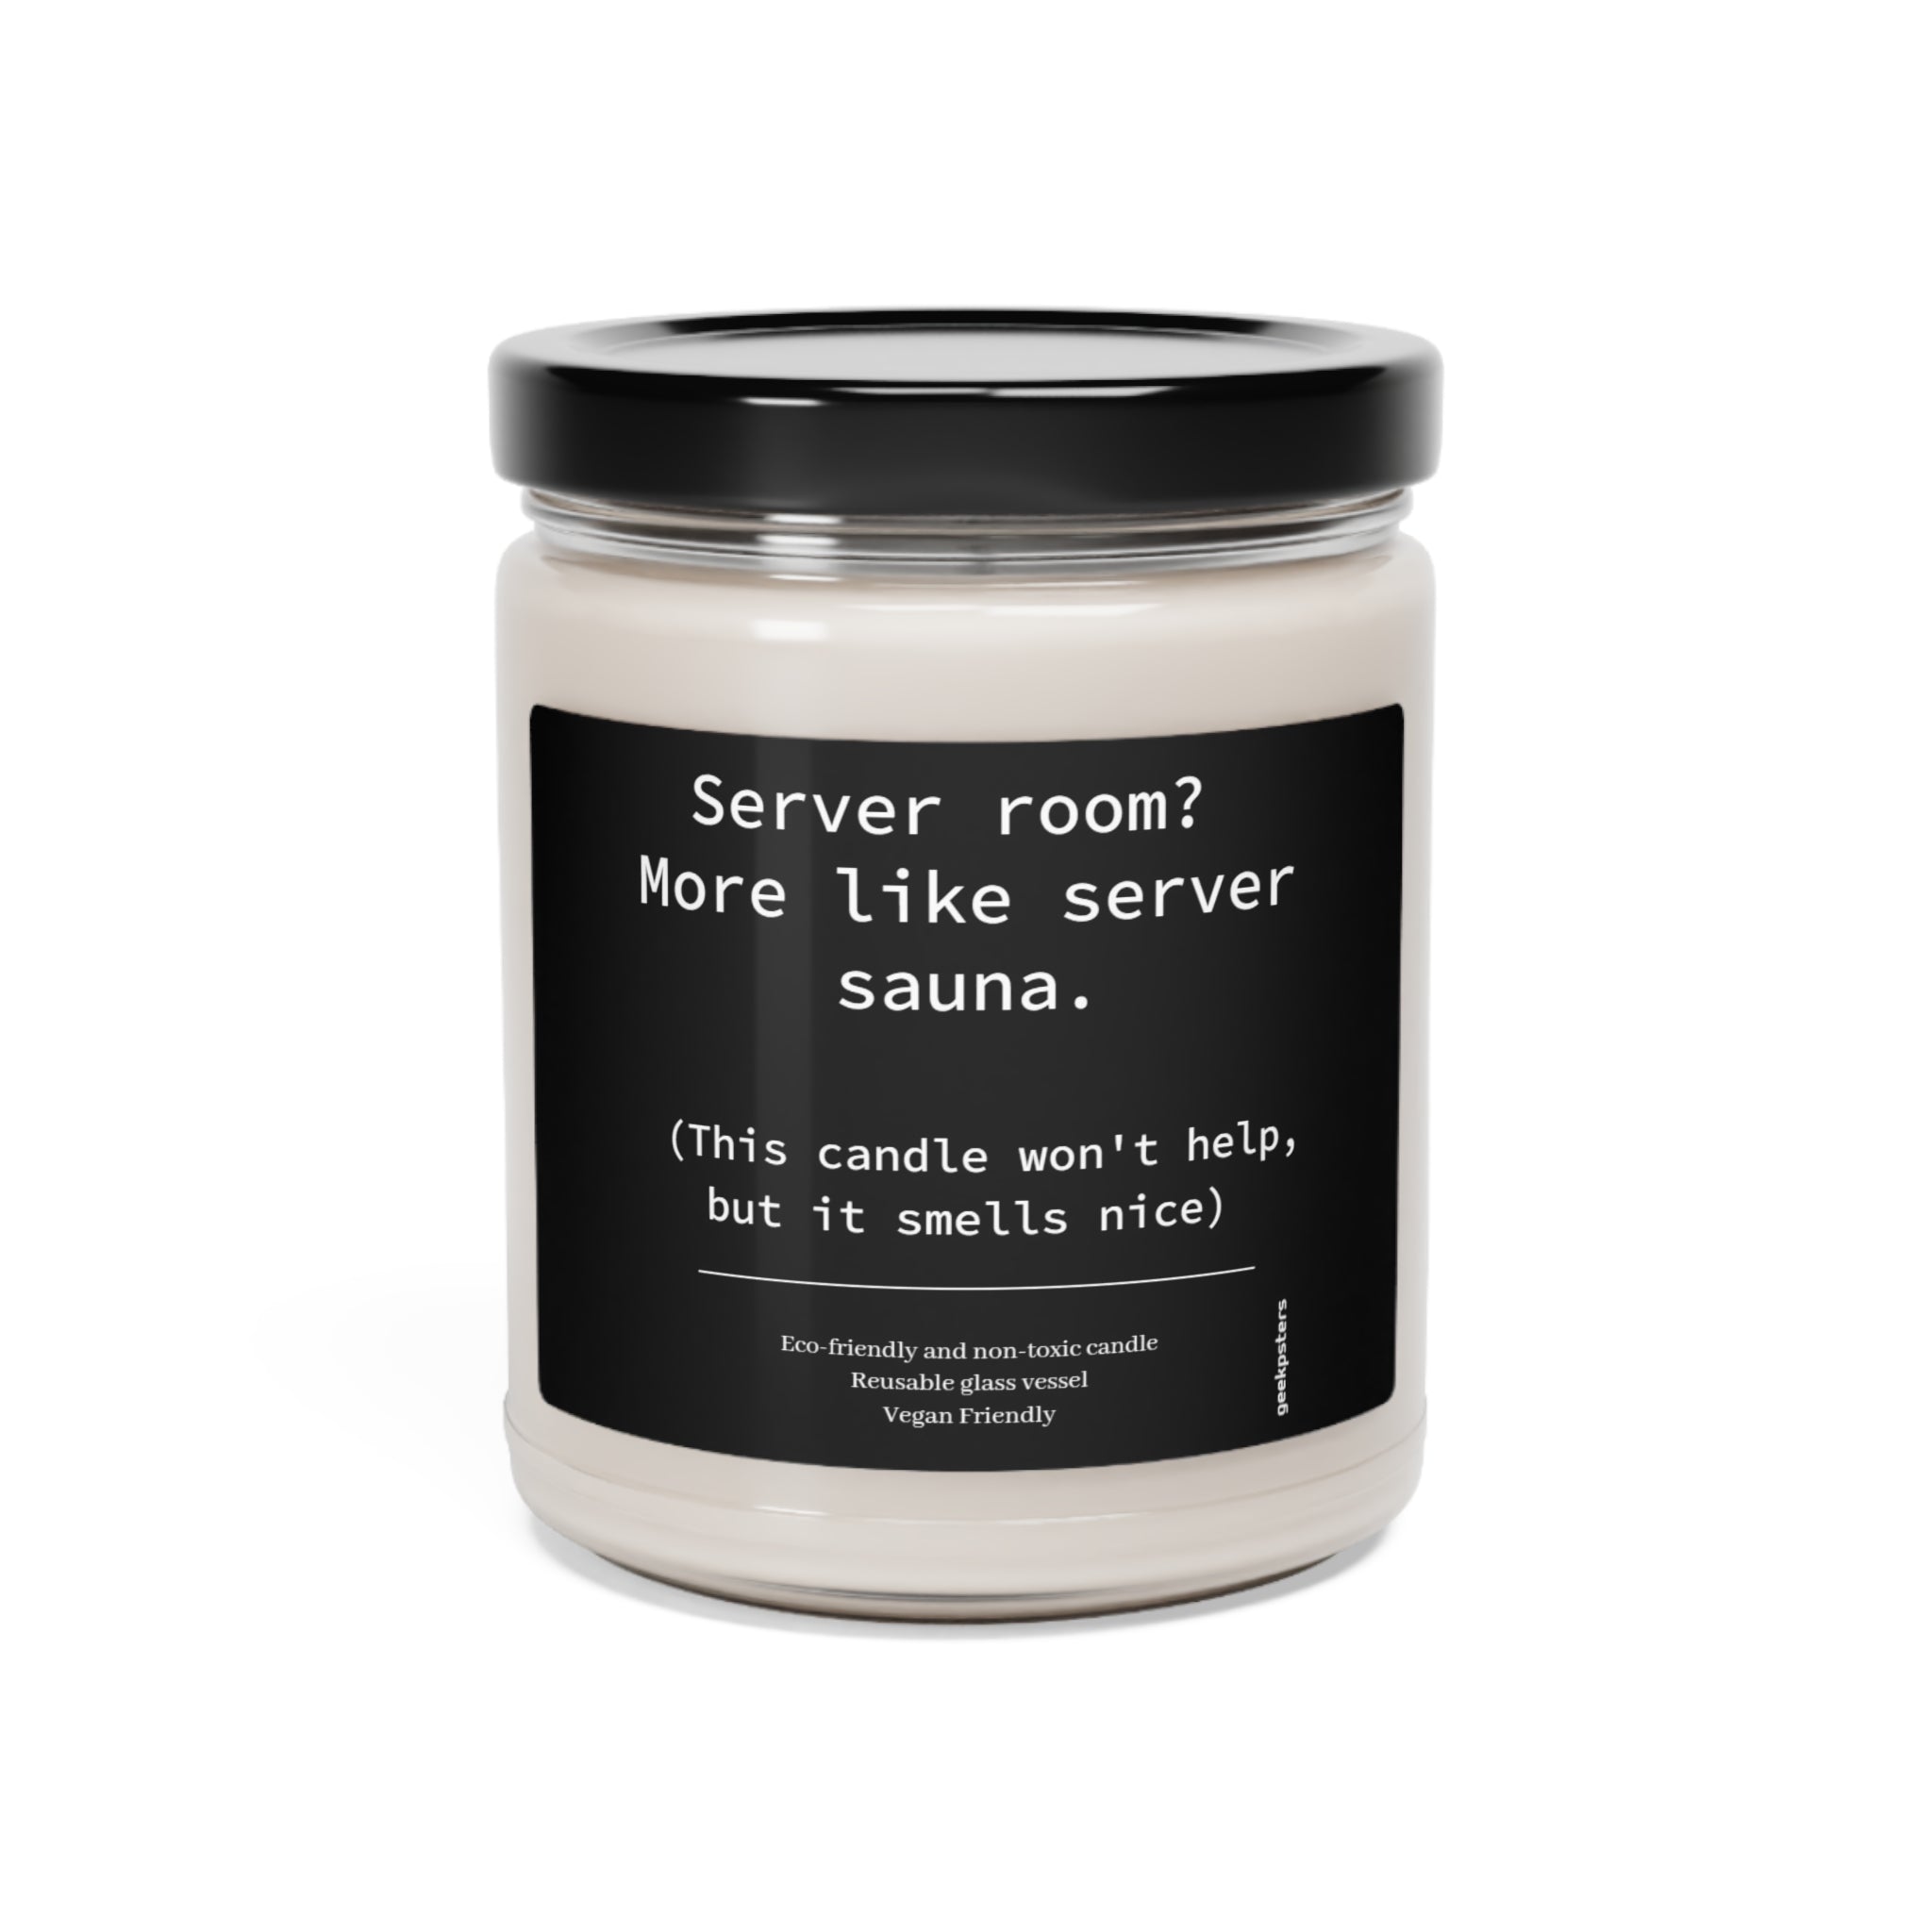 A Server Room? More Like Server Sauna scented candle, 9oz with humorous labeling, suggesting a "server room" fragrance. Made with natural soy wax and a cotton wick, this eco-friendly and vegan-friendly product offers a unique olfactory experience